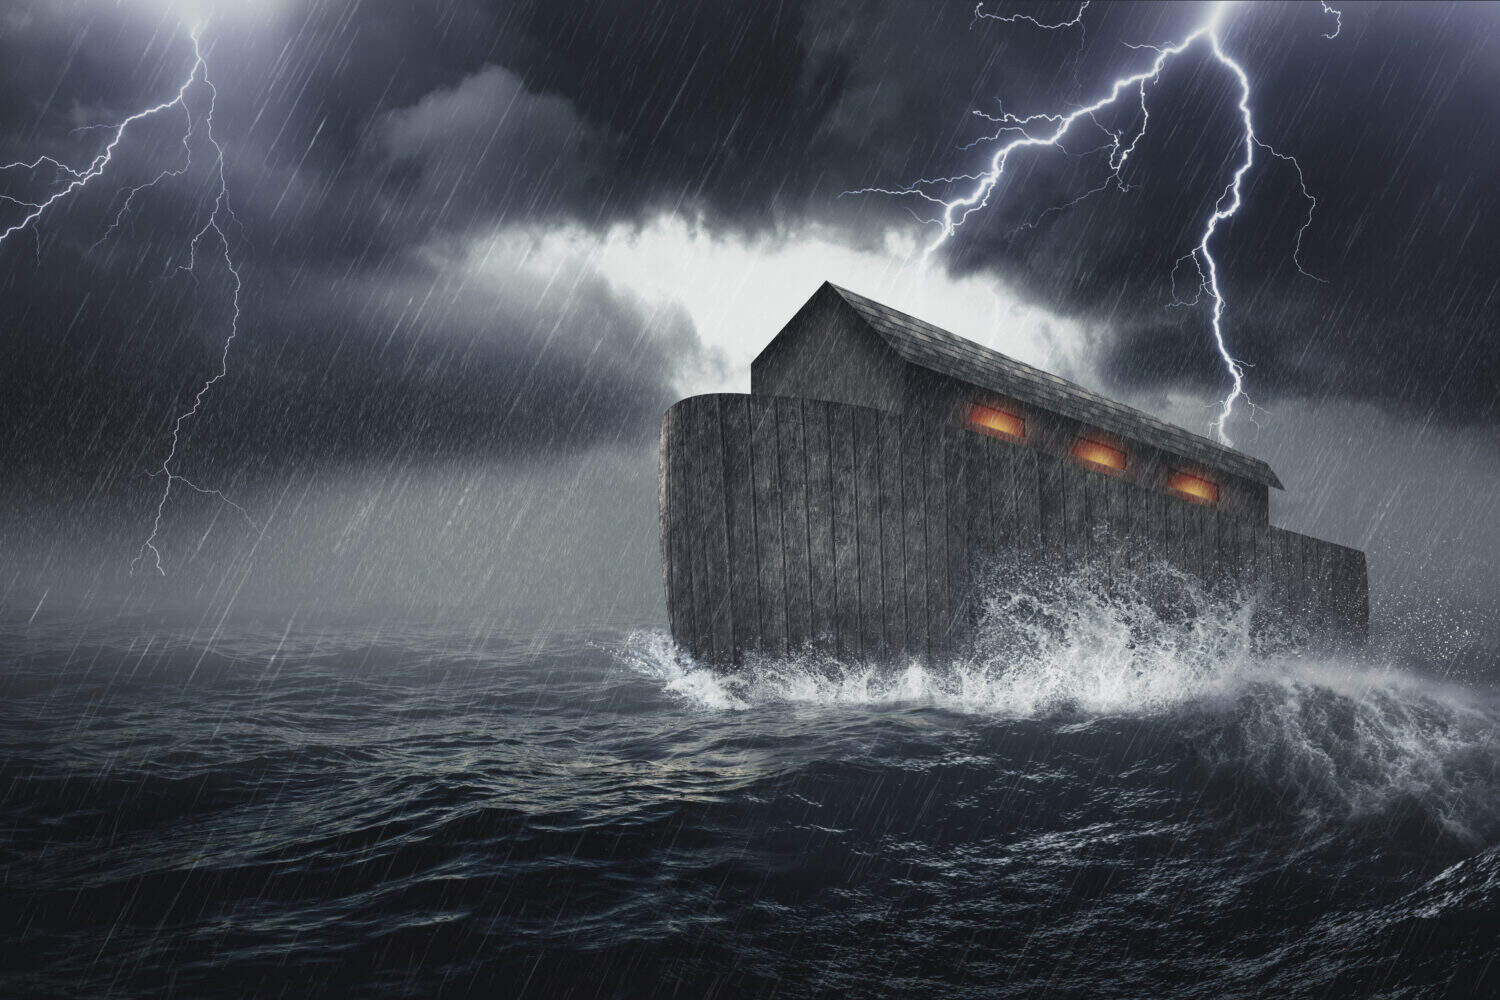 Noah's Ark vessel in the Genesis flood narrative by which God spares Noah, his family, and a remnant of all the world's animals from a world-engulfing flood.